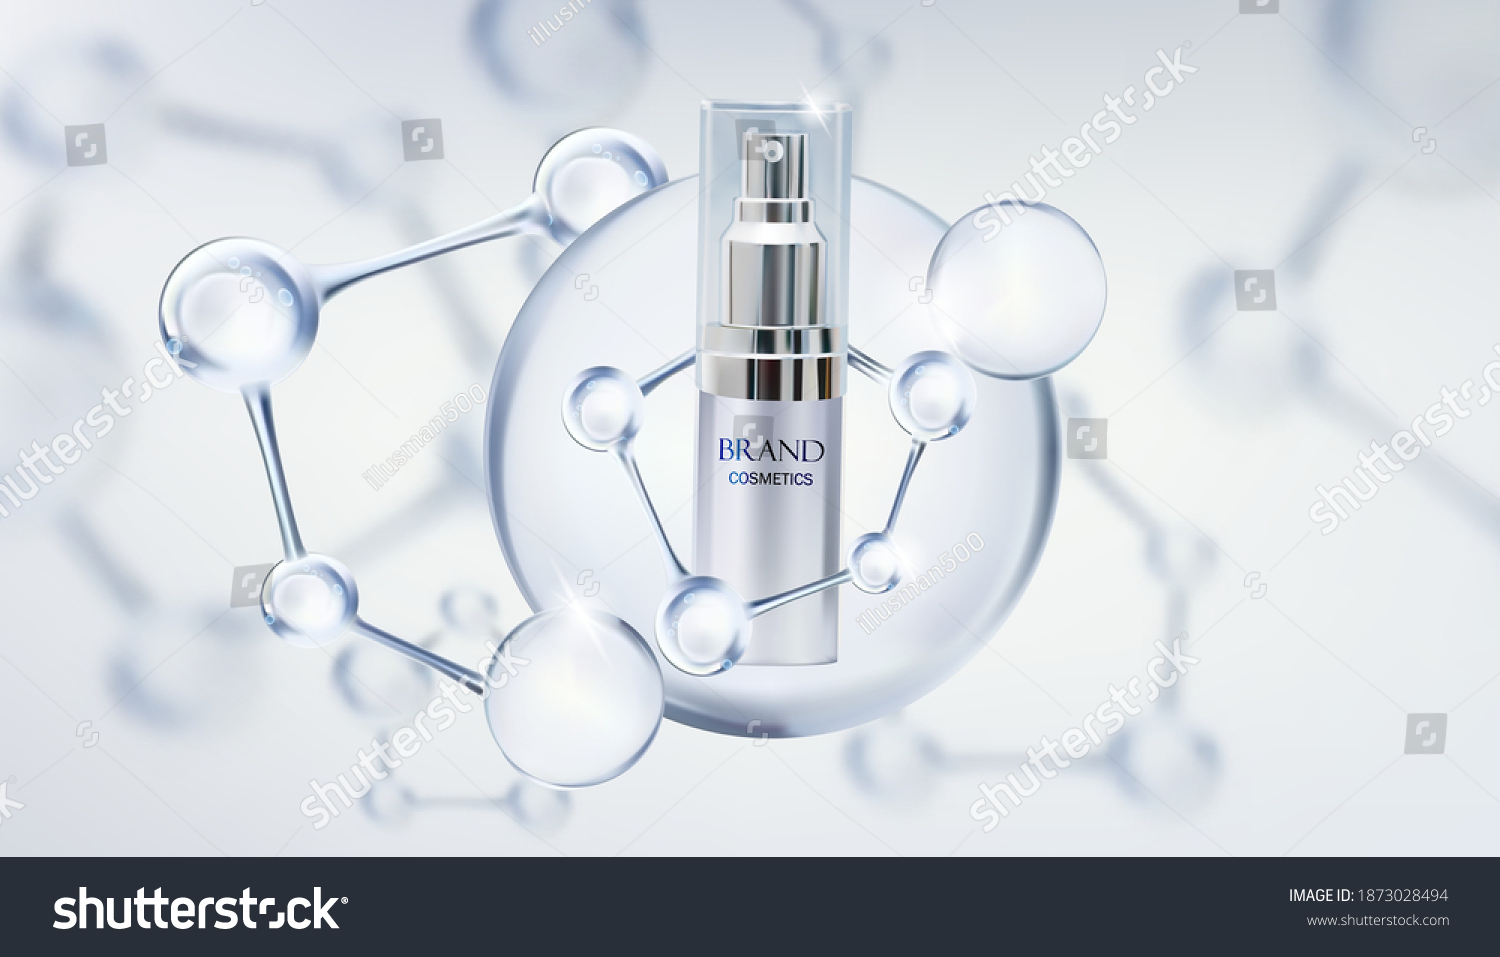 Beauty cosmetic product with molecule.cosmetics bottles mockup banner.Realistic 3d vector #1873028494